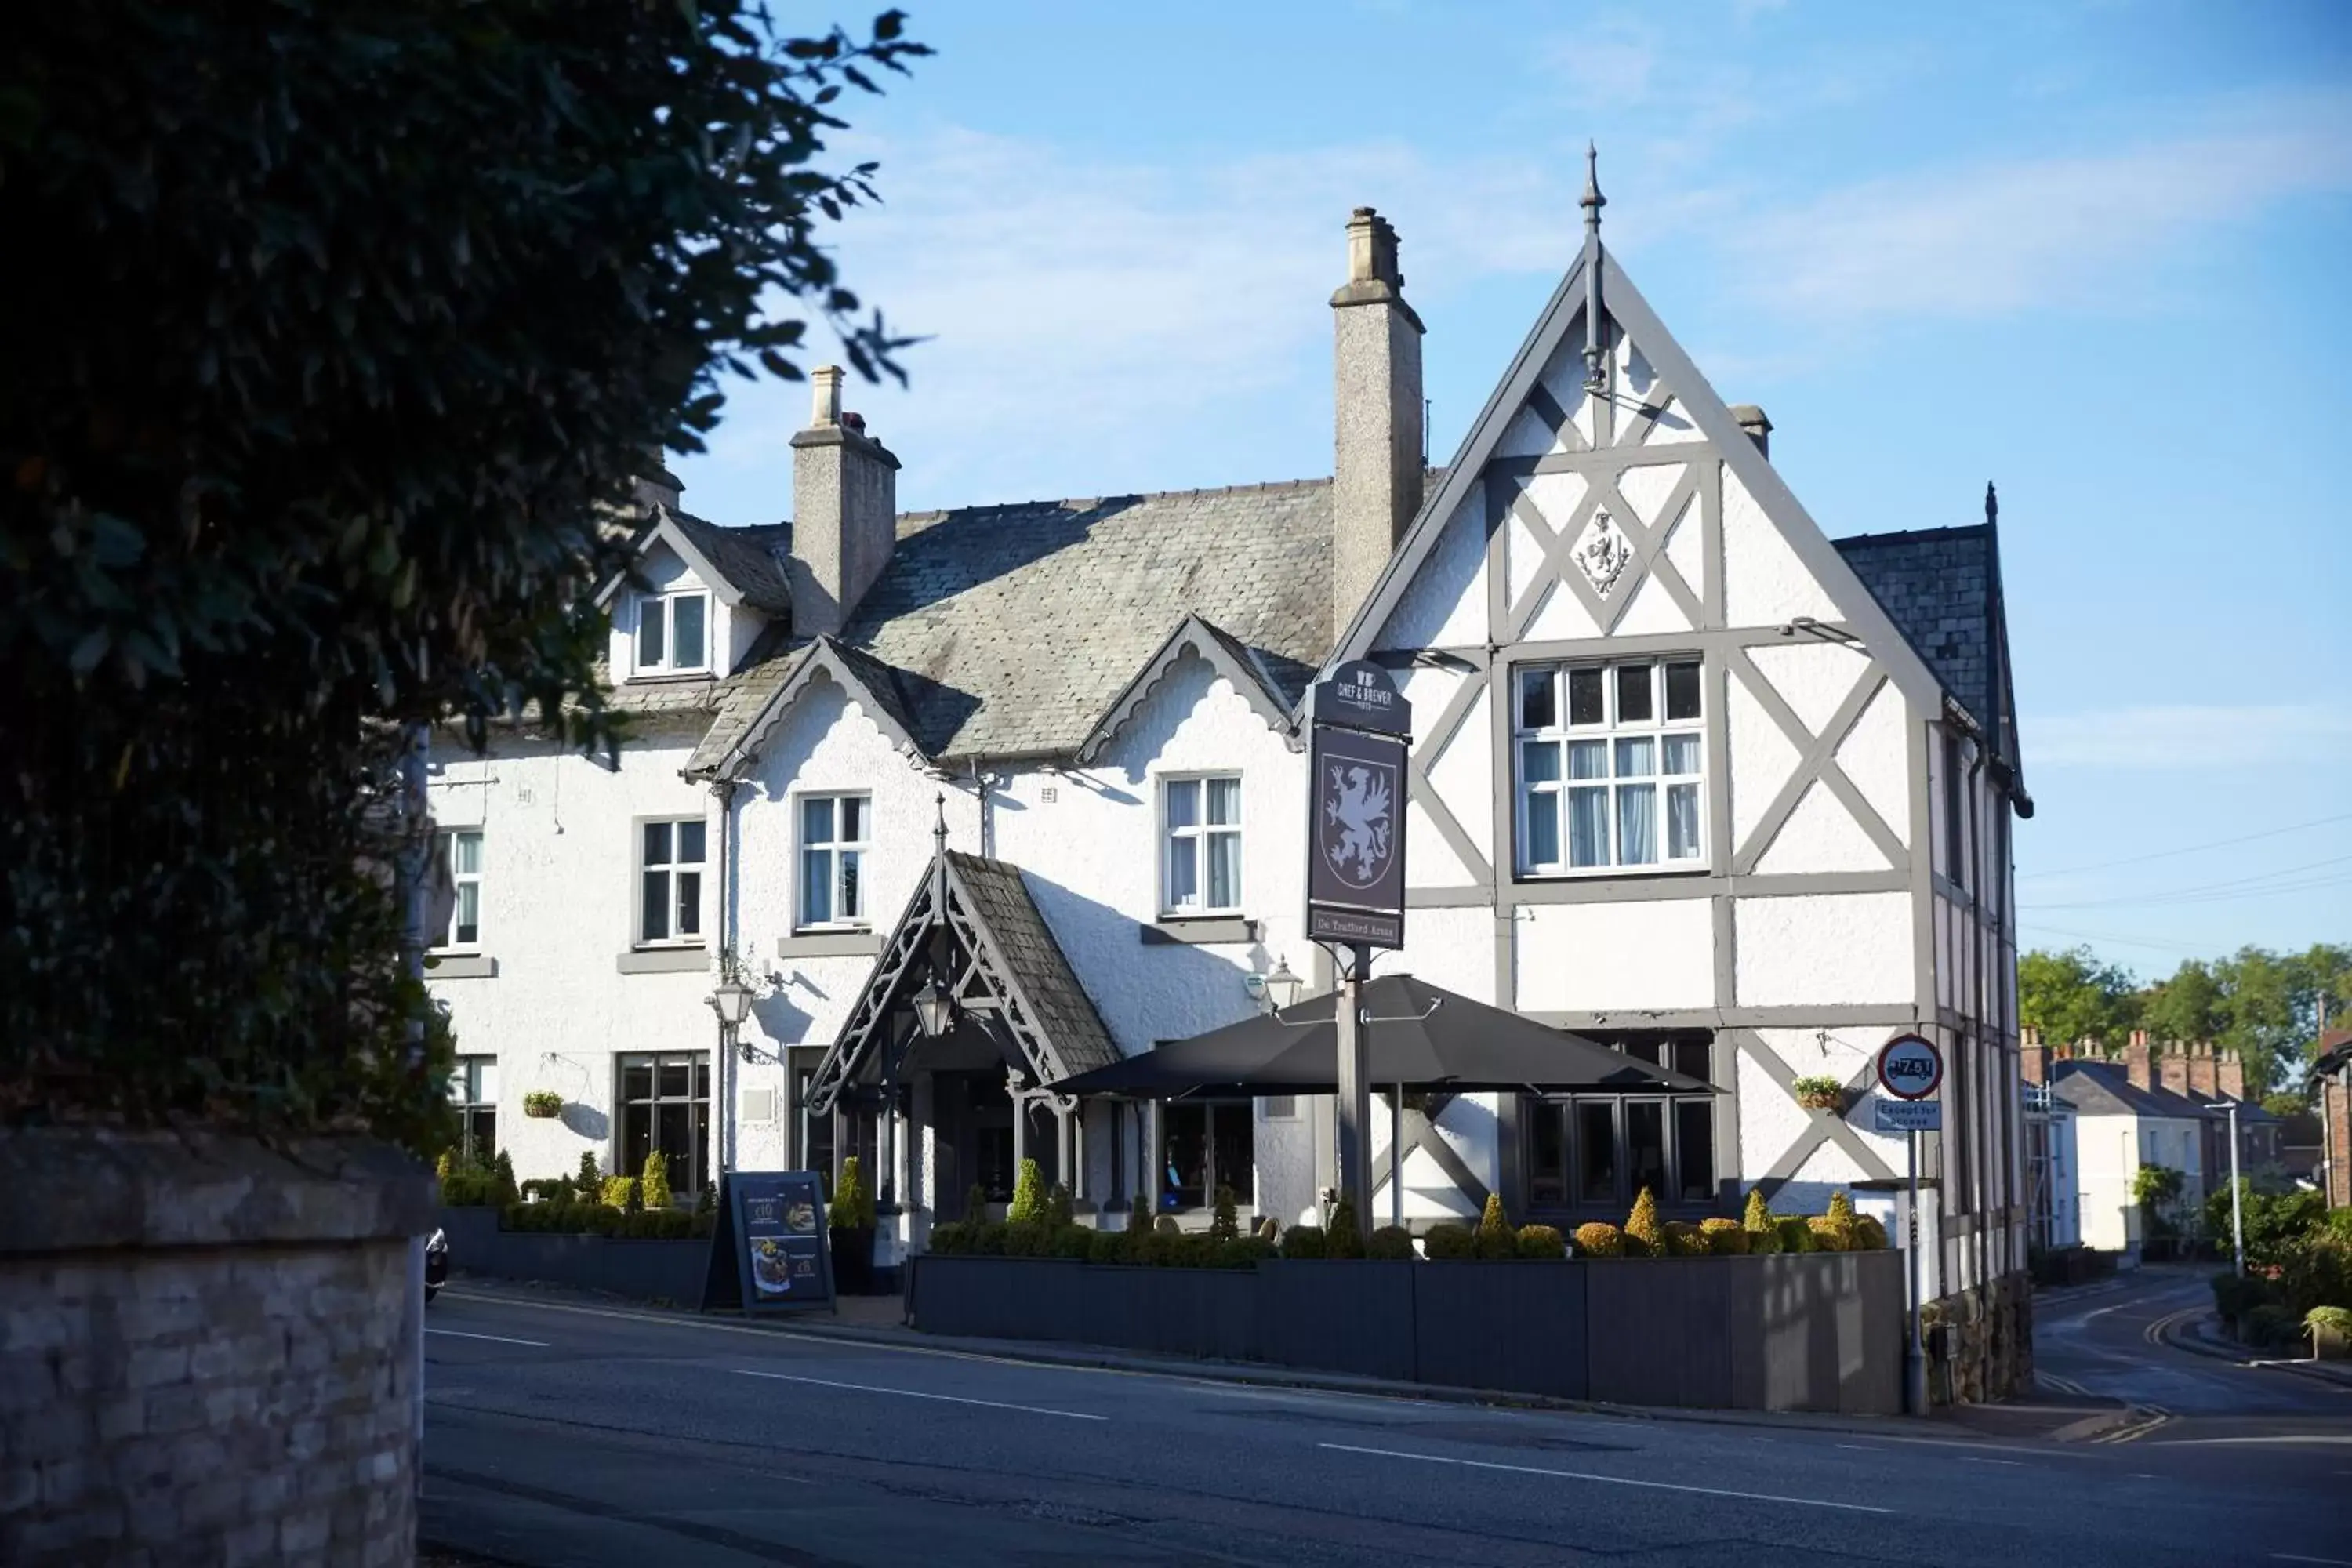 Property Building in De Trafford Arms by Chef & Brewer Collection